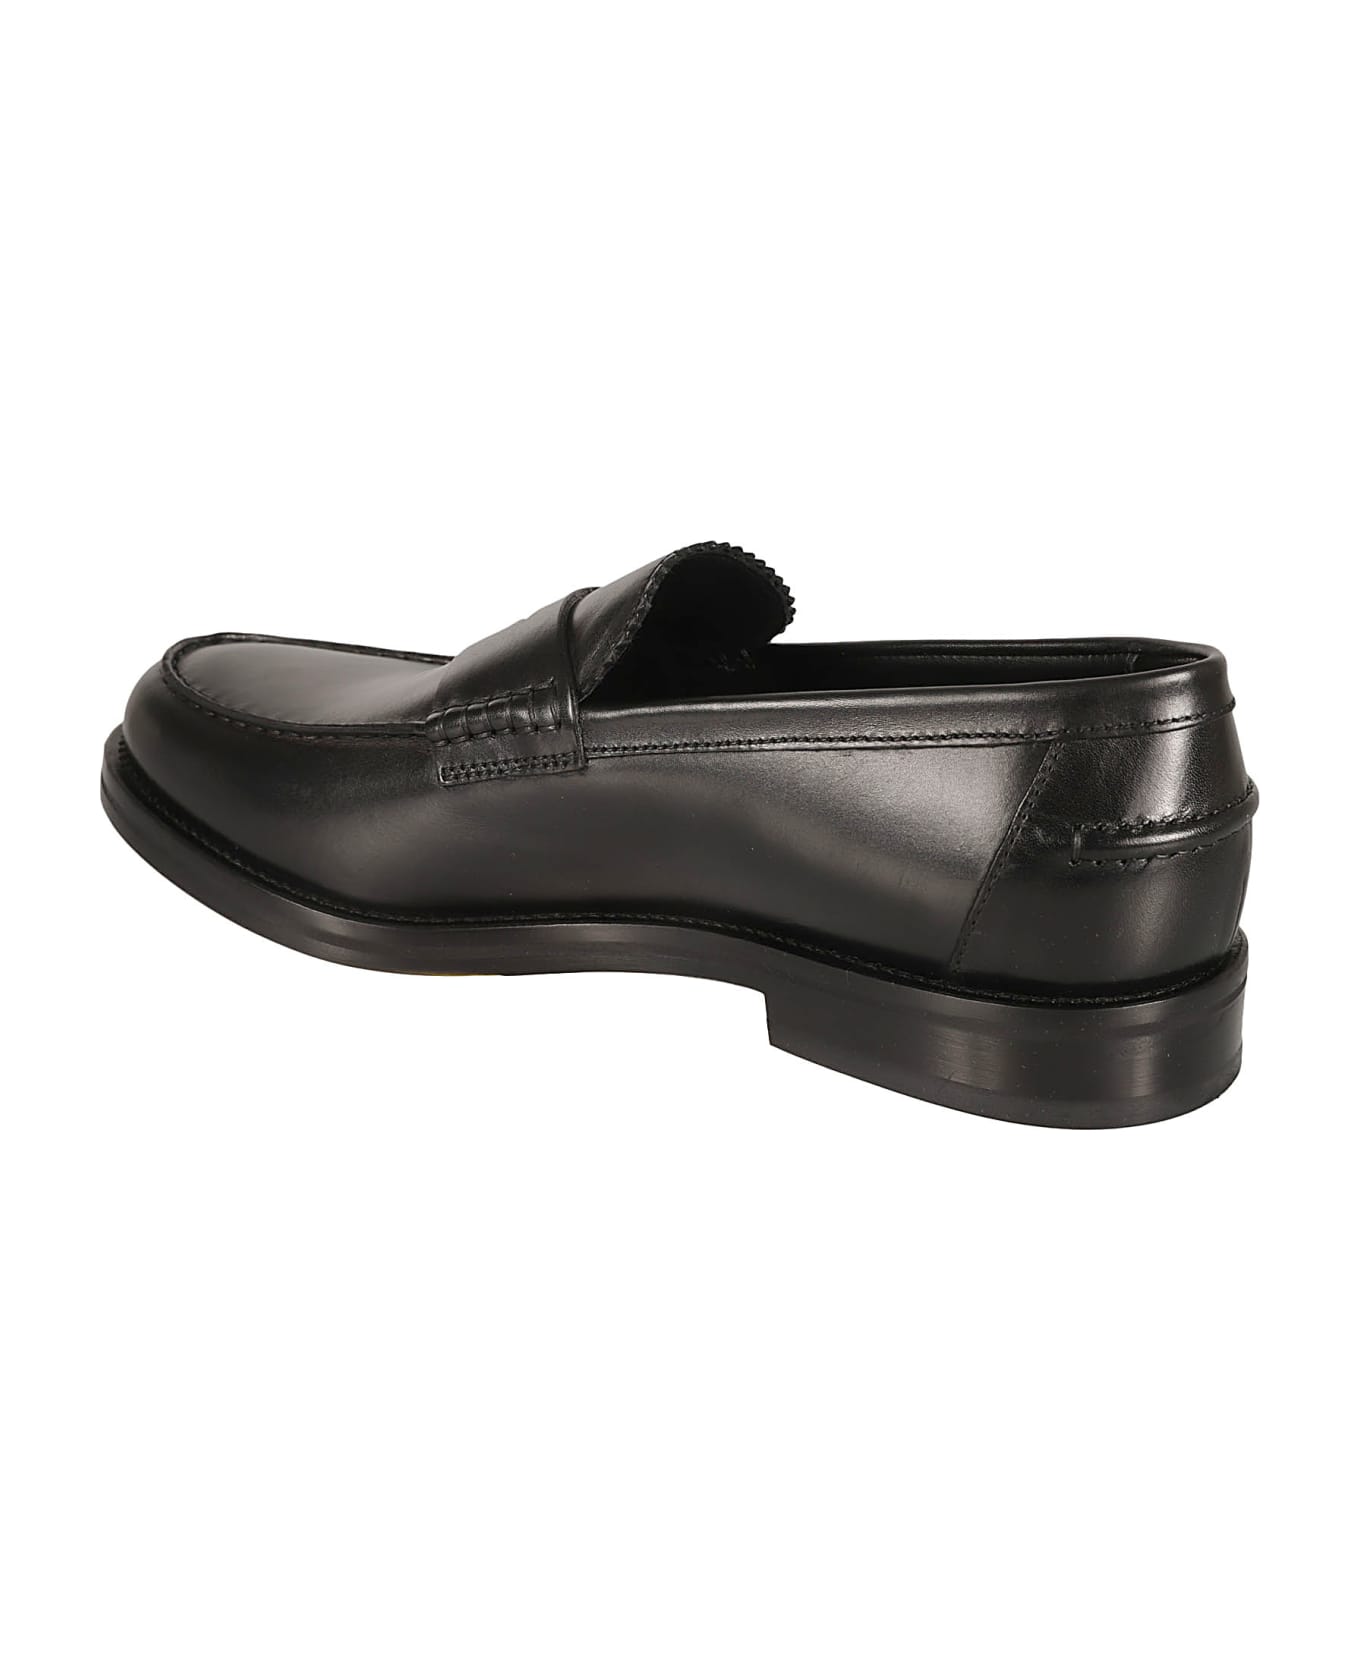 Doucal's Deco Loafers - Black